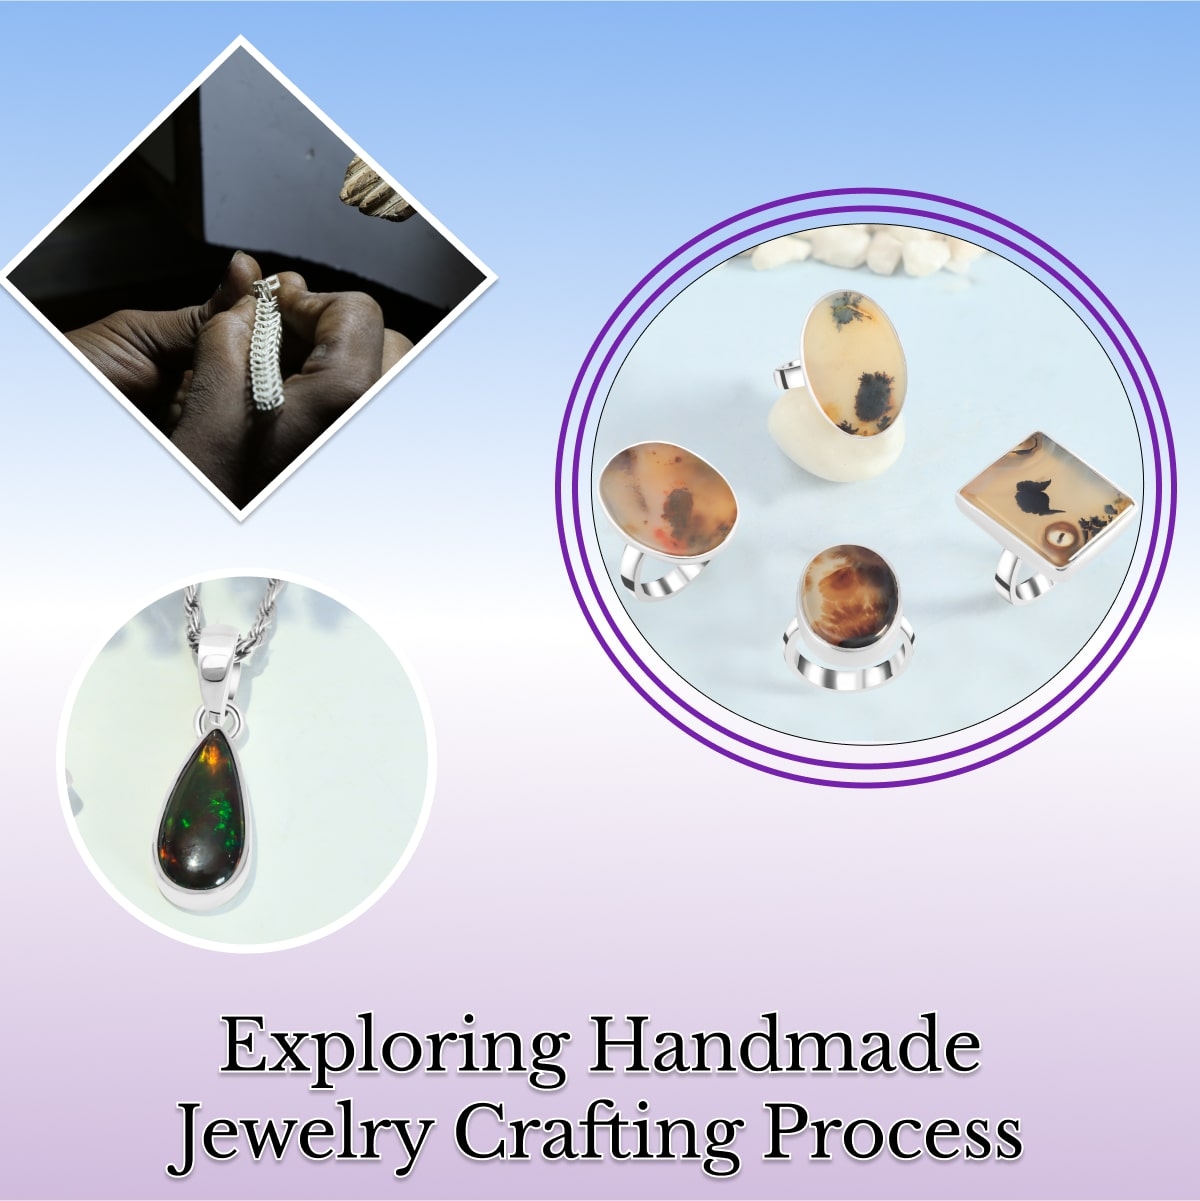 What is Handmade Jewelry or Handcrafted Jewelry?